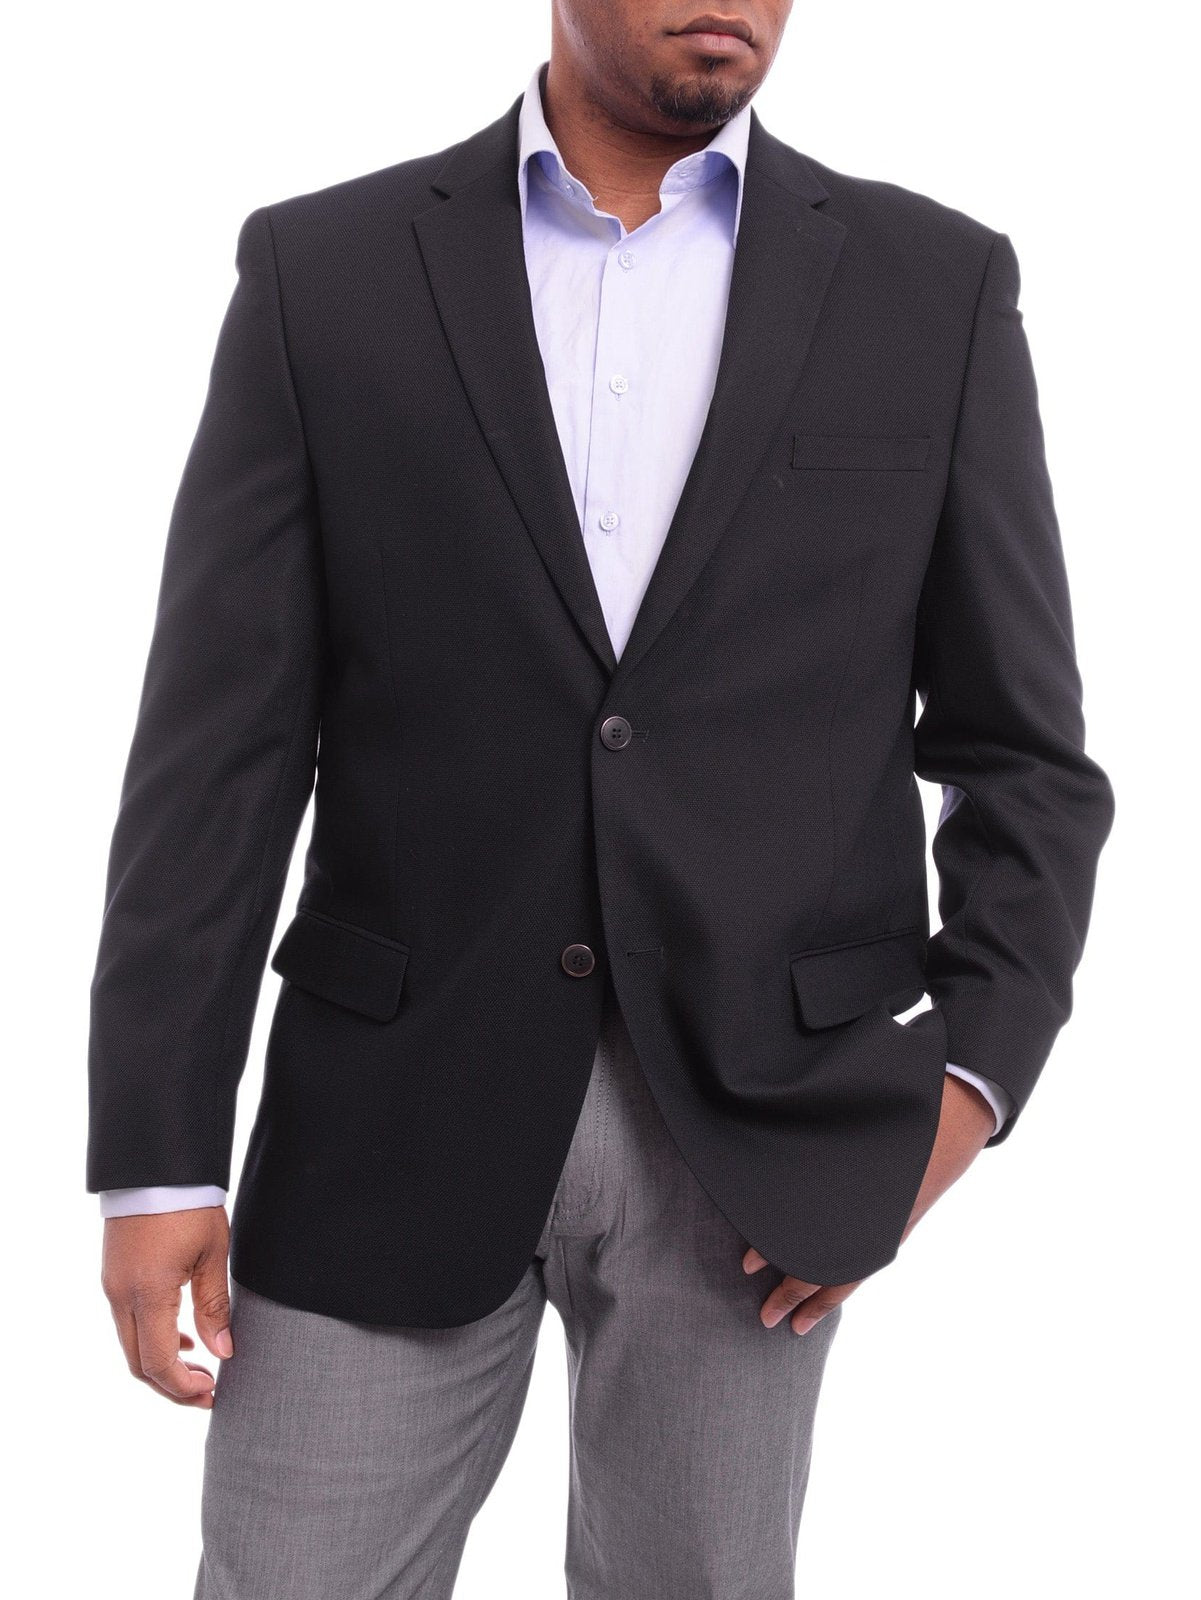 Caravelli BLAZERS Caravelli Classic Fit Navy Blue Hopsack Weave Two Button Stretch Blazer Sportcoat